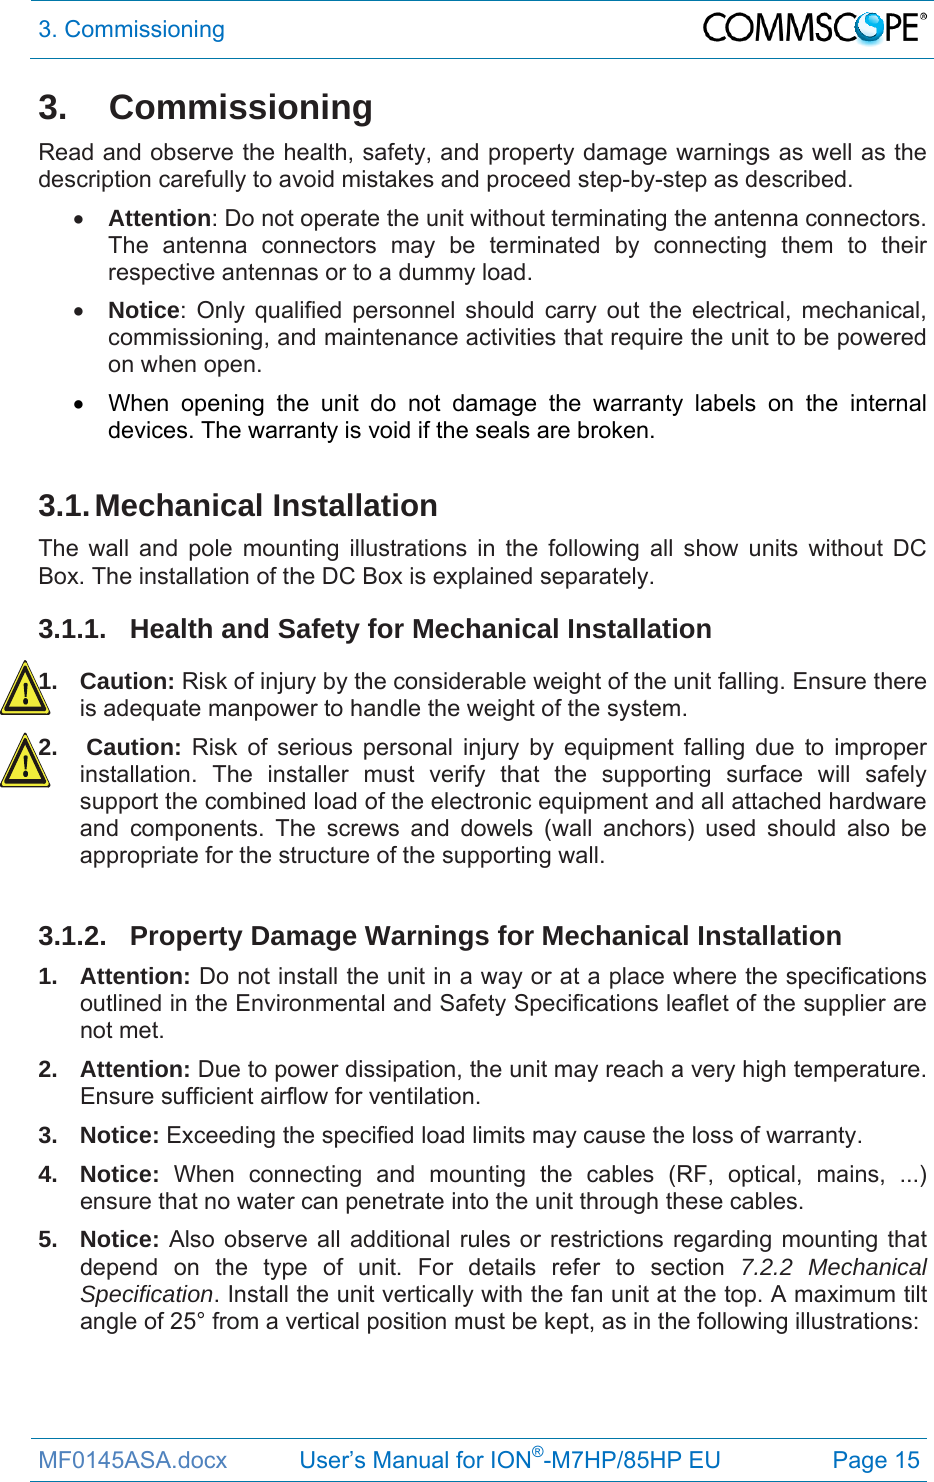 3. Commissioning  MF0145ASA.docx           User’s Manual for ION®-M7HP/85HP EU  Page 15 3. Commissioning Read and observe the health, safety, and property damage warnings as well as the description carefully to avoid mistakes and proceed step-by-step as described.   Attention: Do not operate the unit without terminating the antenna connectors. The antenna connectors may be terminated by connecting them to their respective antennas or to a dummy load.  Notice: Only qualified personnel should carry out the electrical, mechanical, commissioning, and maintenance activities that require the unit to be powered on when open.    When opening the unit do not damage the warranty labels on the internal devices. The warranty is void if the seals are broken.  3.1. Mechanical  Installation The wall and pole mounting illustrations in the following all show units without DC Box. The installation of the DC Box is explained separately. 3.1.1. Health and Safety for Mechanical Installation 1. Caution: Risk of injury by the considerable weight of the unit falling. Ensure there is adequate manpower to handle the weight of the system. 2.   Caution: Risk of serious personal injury by equipment falling due to improper installation. The installer must verify that the supporting surface will safely support the combined load of the electronic equipment and all attached hardware and components. The screws and dowels (wall anchors) used should also be appropriate for the structure of the supporting wall.  3.1.2.  Property Damage Warnings for Mechanical Installation 1. Attention: Do not install the unit in a way or at a place where the specifications outlined in the Environmental and Safety Specifications leaflet of the supplier are not met. 2. Attention: Due to power dissipation, the unit may reach a very high temperature. Ensure sufficient airflow for ventilation. 3. Notice: Exceeding the specified load limits may cause the loss of warranty. 4. Notice: When connecting and mounting the cables (RF, optical, mains, ...) ensure that no water can penetrate into the unit through these cables. 5. Notice: Also observe all additional rules or restrictions regarding mounting that depend on the type of unit. For details refer to section 7.2.2 Mechanical Specification. Install the unit vertically with the fan unit at the top. A maximum tilt angle of 25° from a vertical position must be kept, as in the following illustrations:   